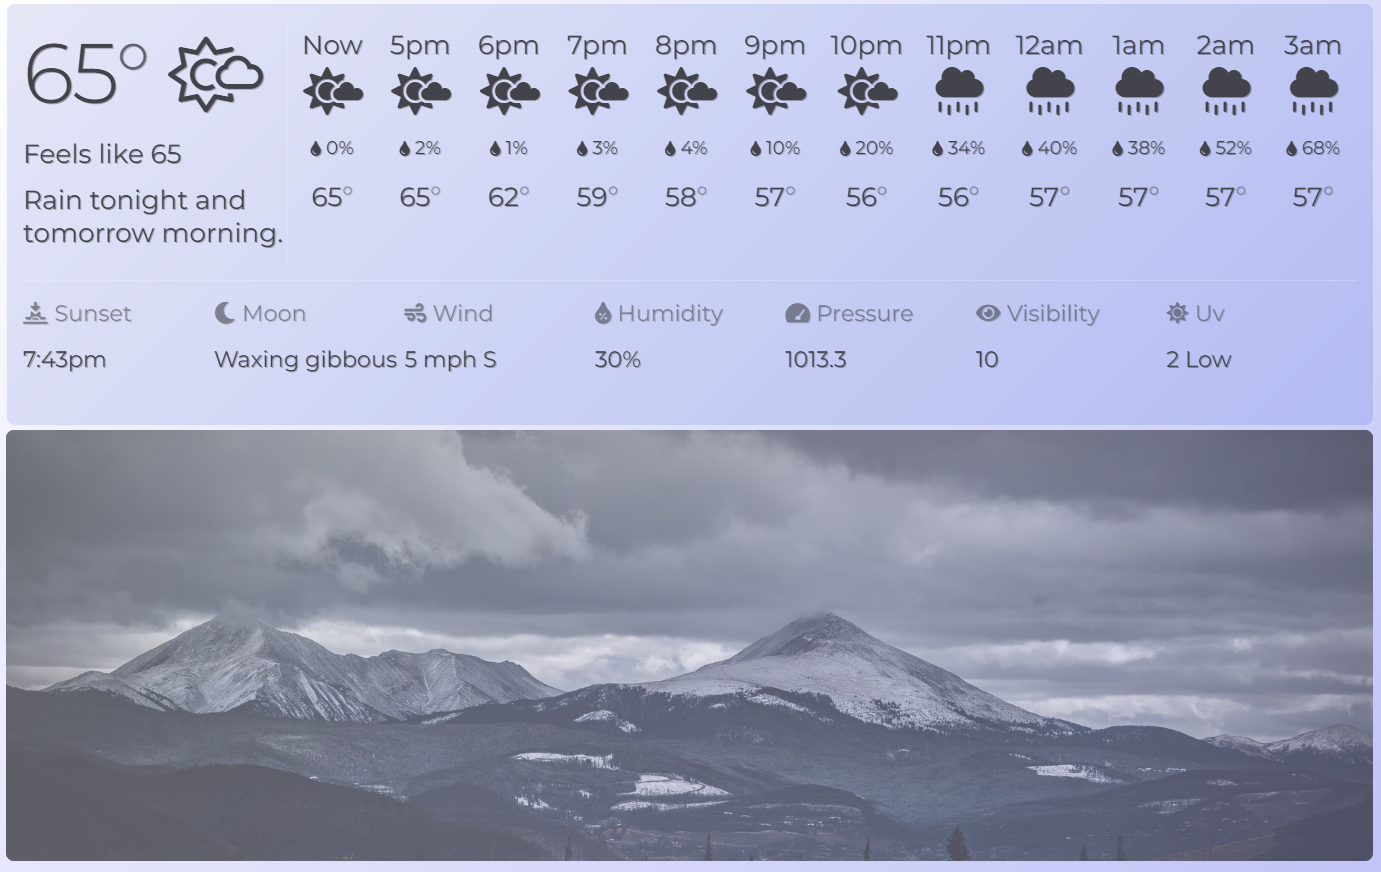 Introducing Hourly Weather, News Headlines with Photos, and more